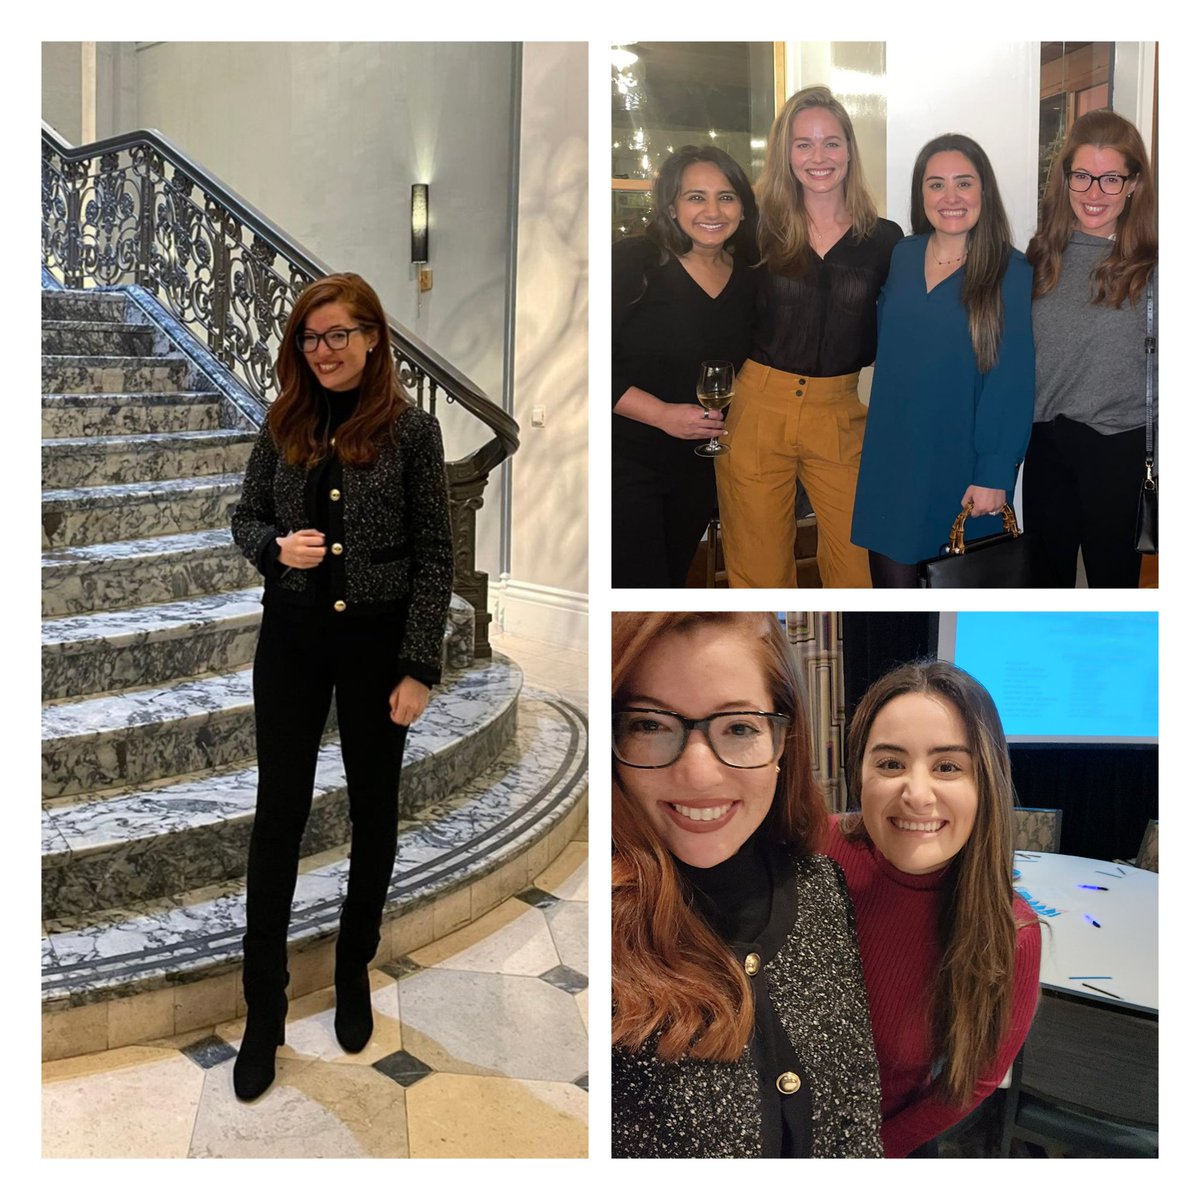 Such a great way to kickoff #JPM23 with these incredible women in life science + biotech! #womenshealth #biotech #lifescience #JPM2023 #jpm #femalefounders #jpmhealth